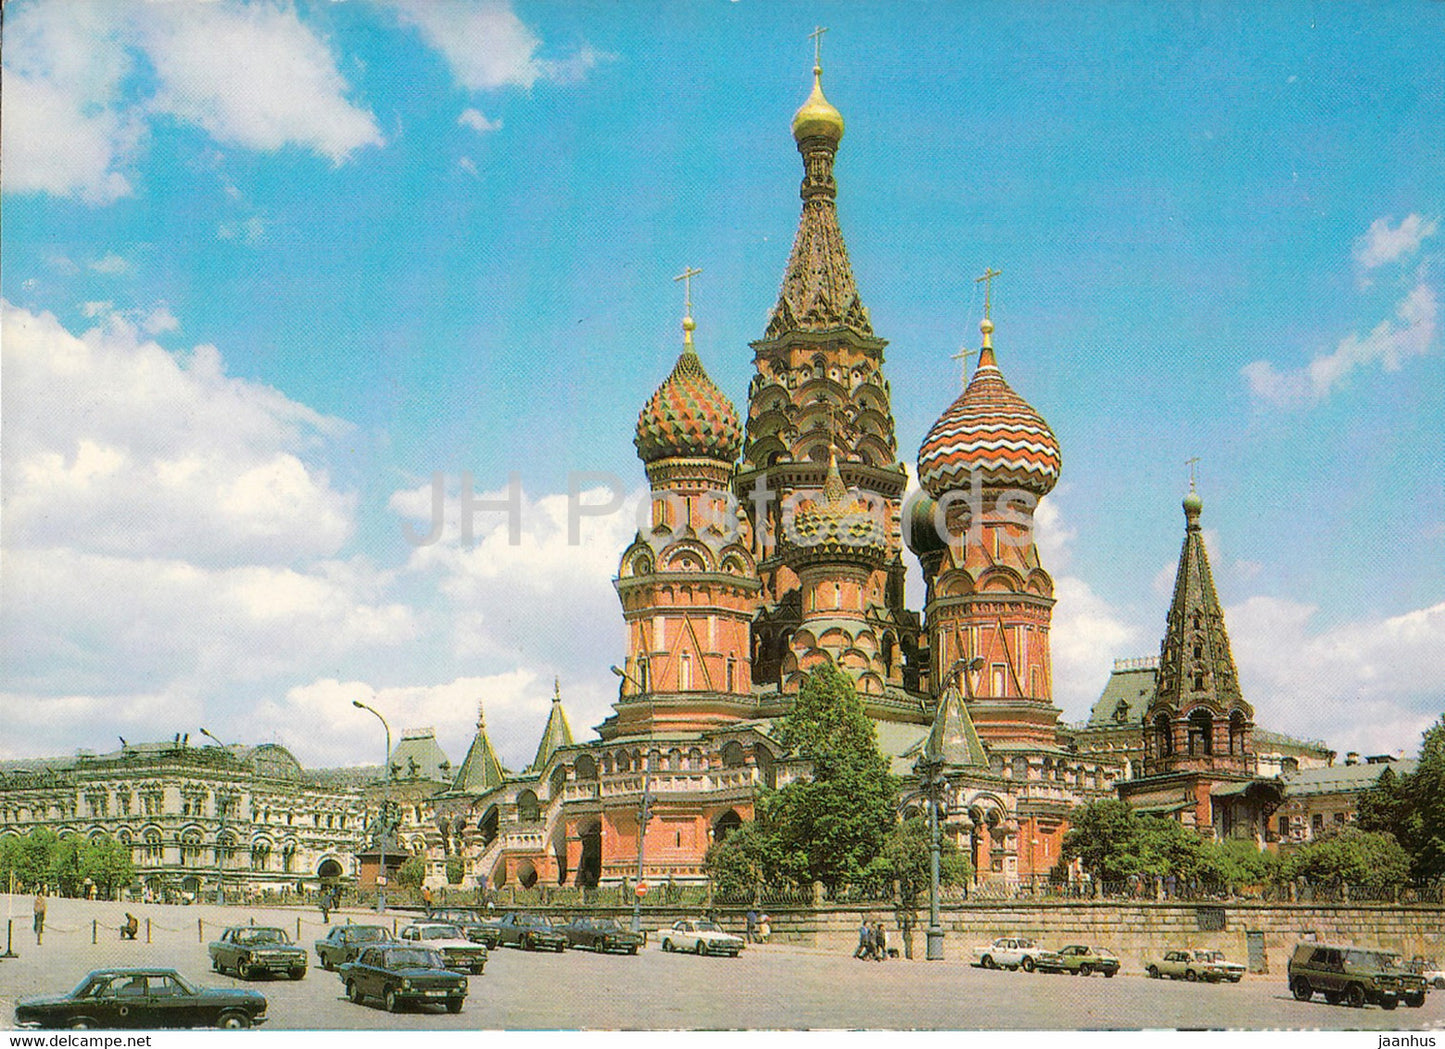 Moscow - Pokrovsky Cathedral - St. Basil's Cathedral - car Volga - postal stationery - 1986 - Russia USSR - unused - JH Postcards